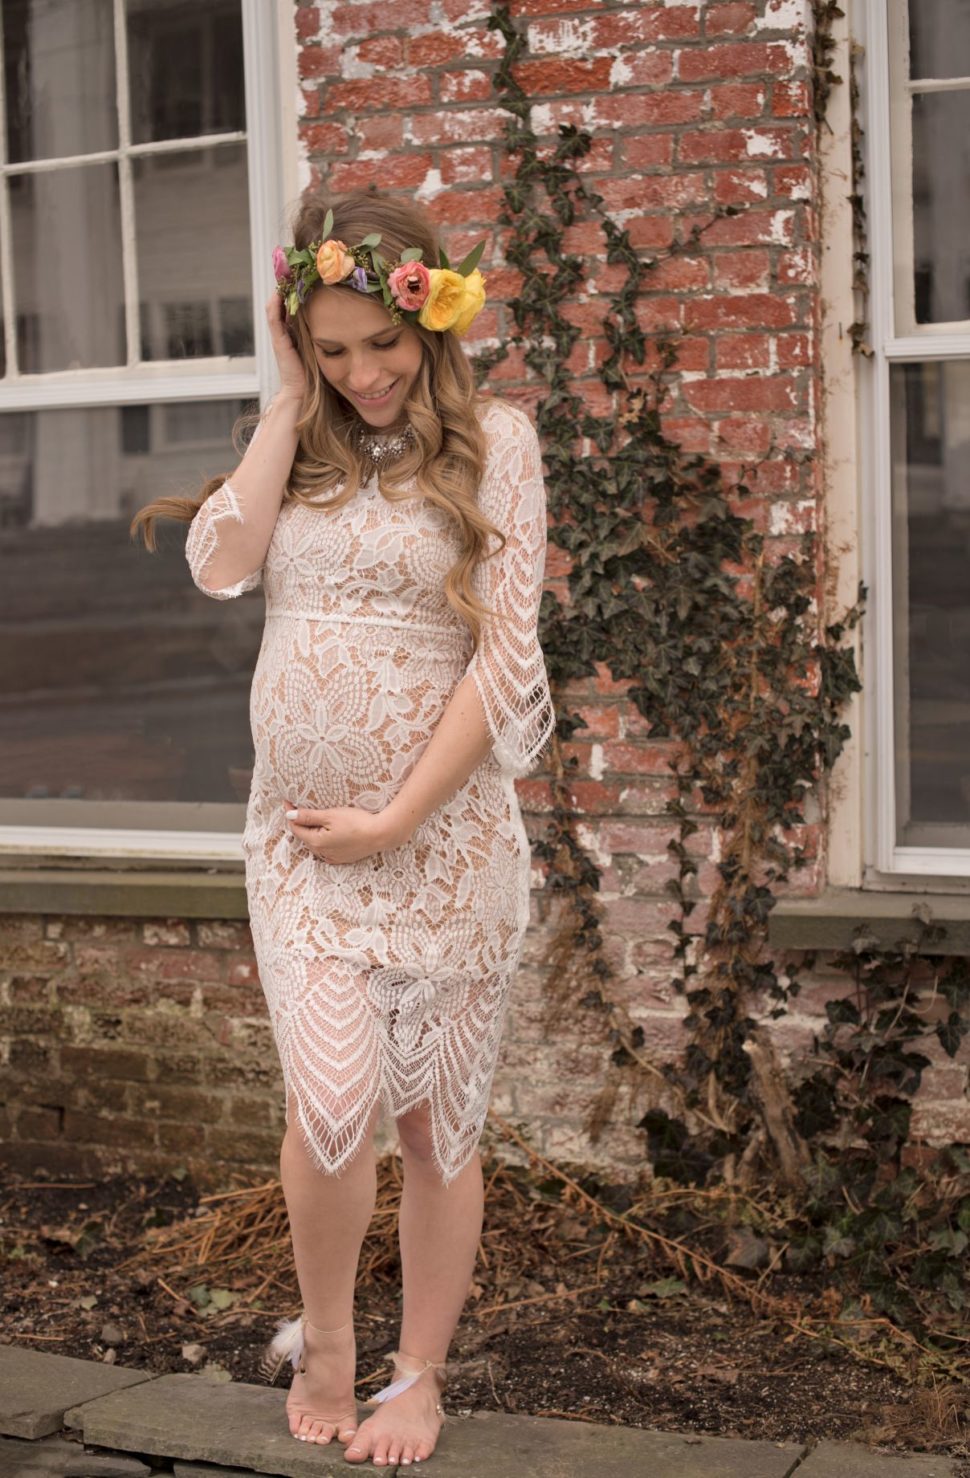 Medium Size of Baby Shower:baby Shower Outfits For Dad Baby Shower Outfits For Mom And Dad Baby Shower Outfit For Mom Winter Mom And Dad Shirts For Baby Shower Baby Shower Dresses Cute Inexpensive Maternity Clothes Maternity Evening Gowns Plus Size Maternity Dresses For Baby Shower